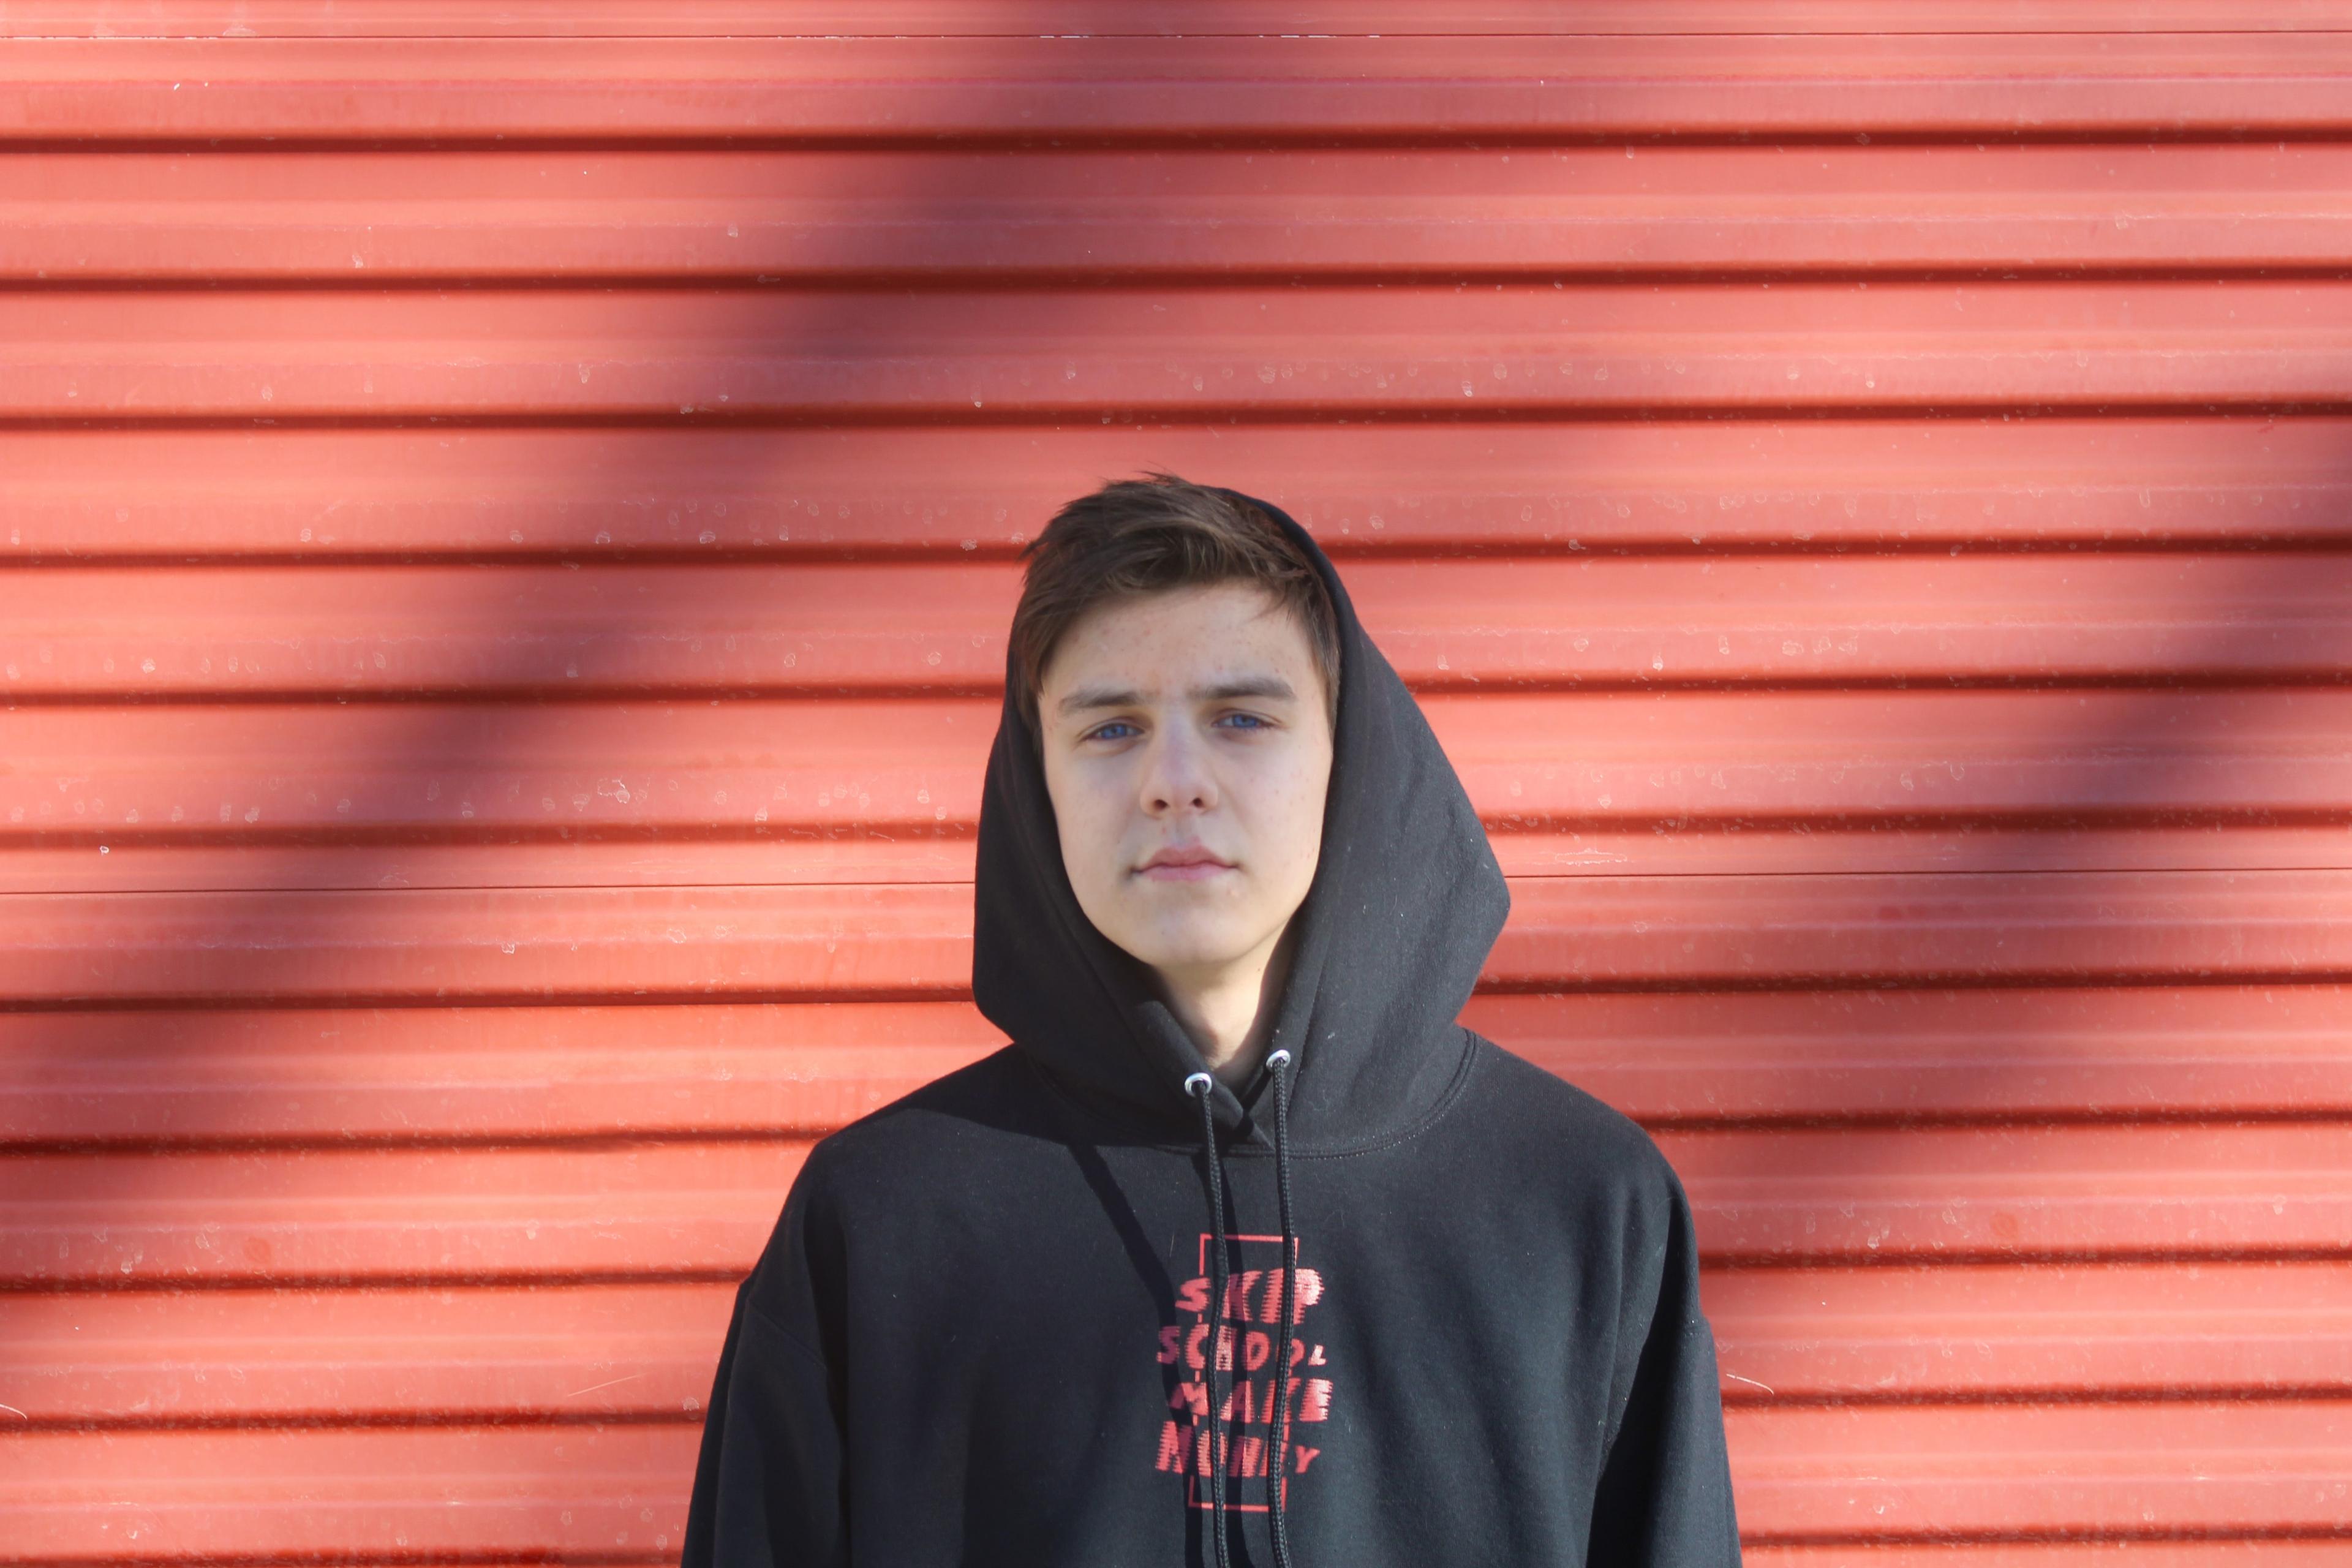 A teenage boy in a black hoodie standing against a red wall